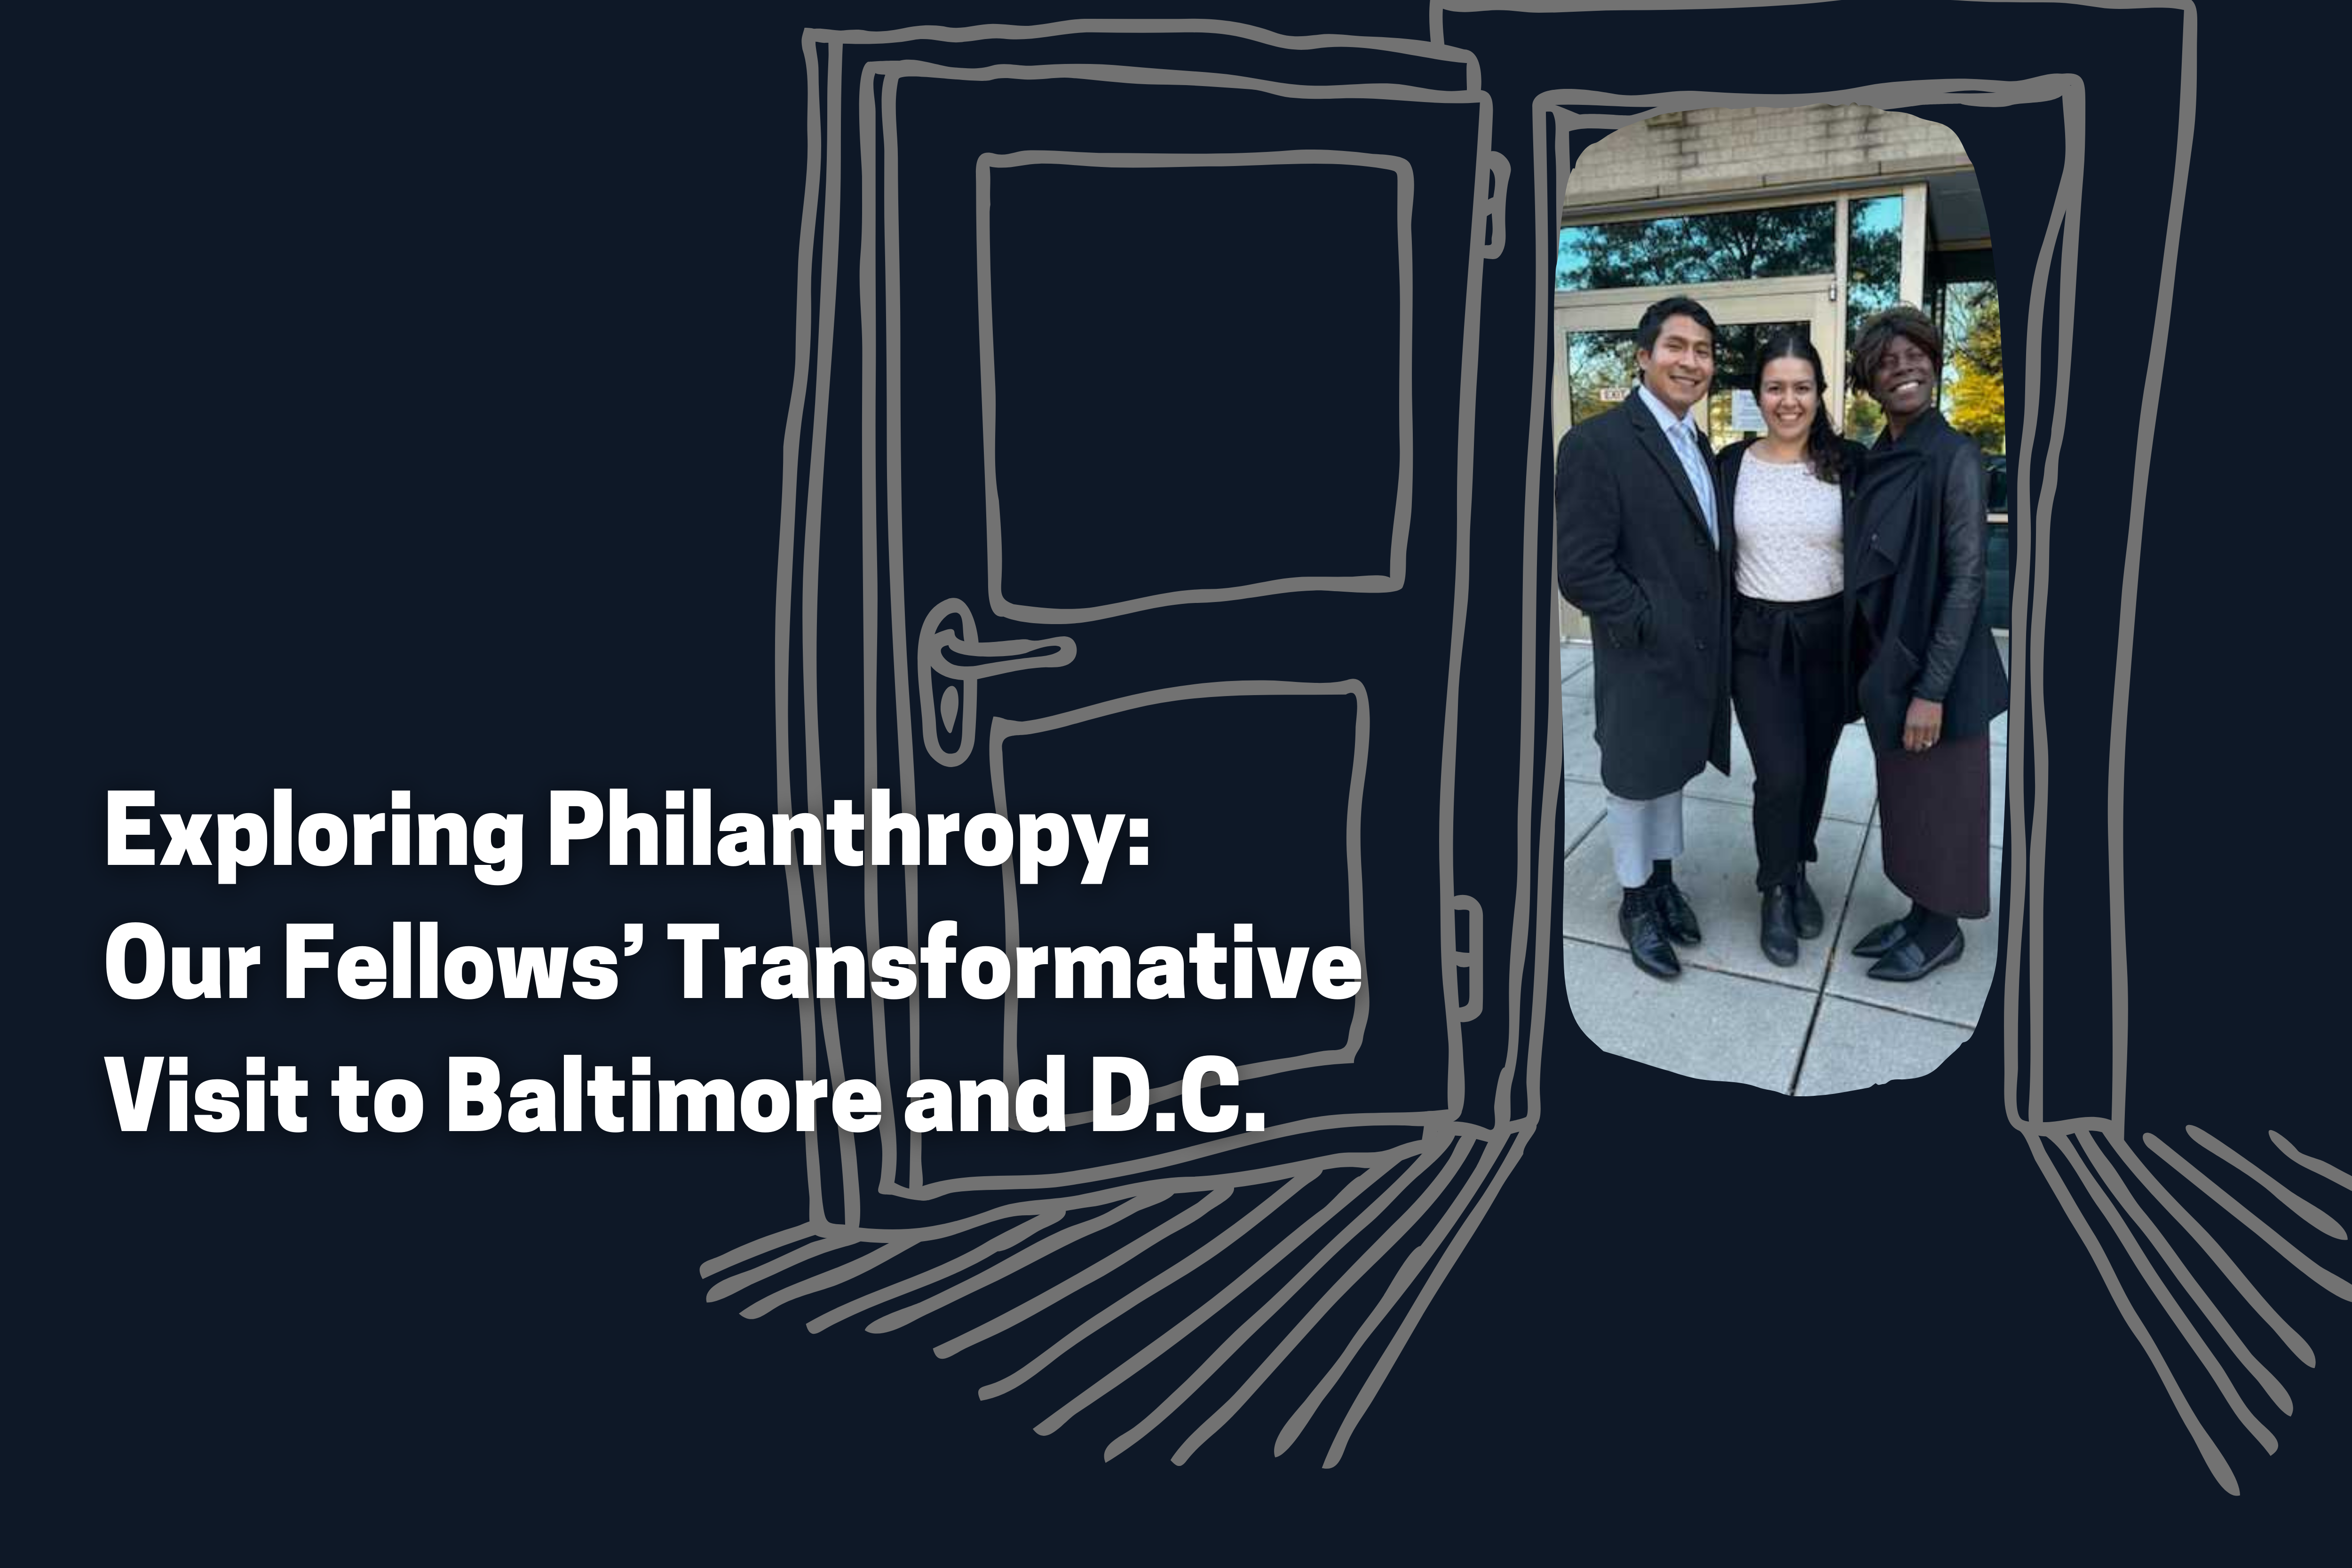 Exploring Philanthropy: Our Fellows' Transformative Visit to Baltimore and D.C.